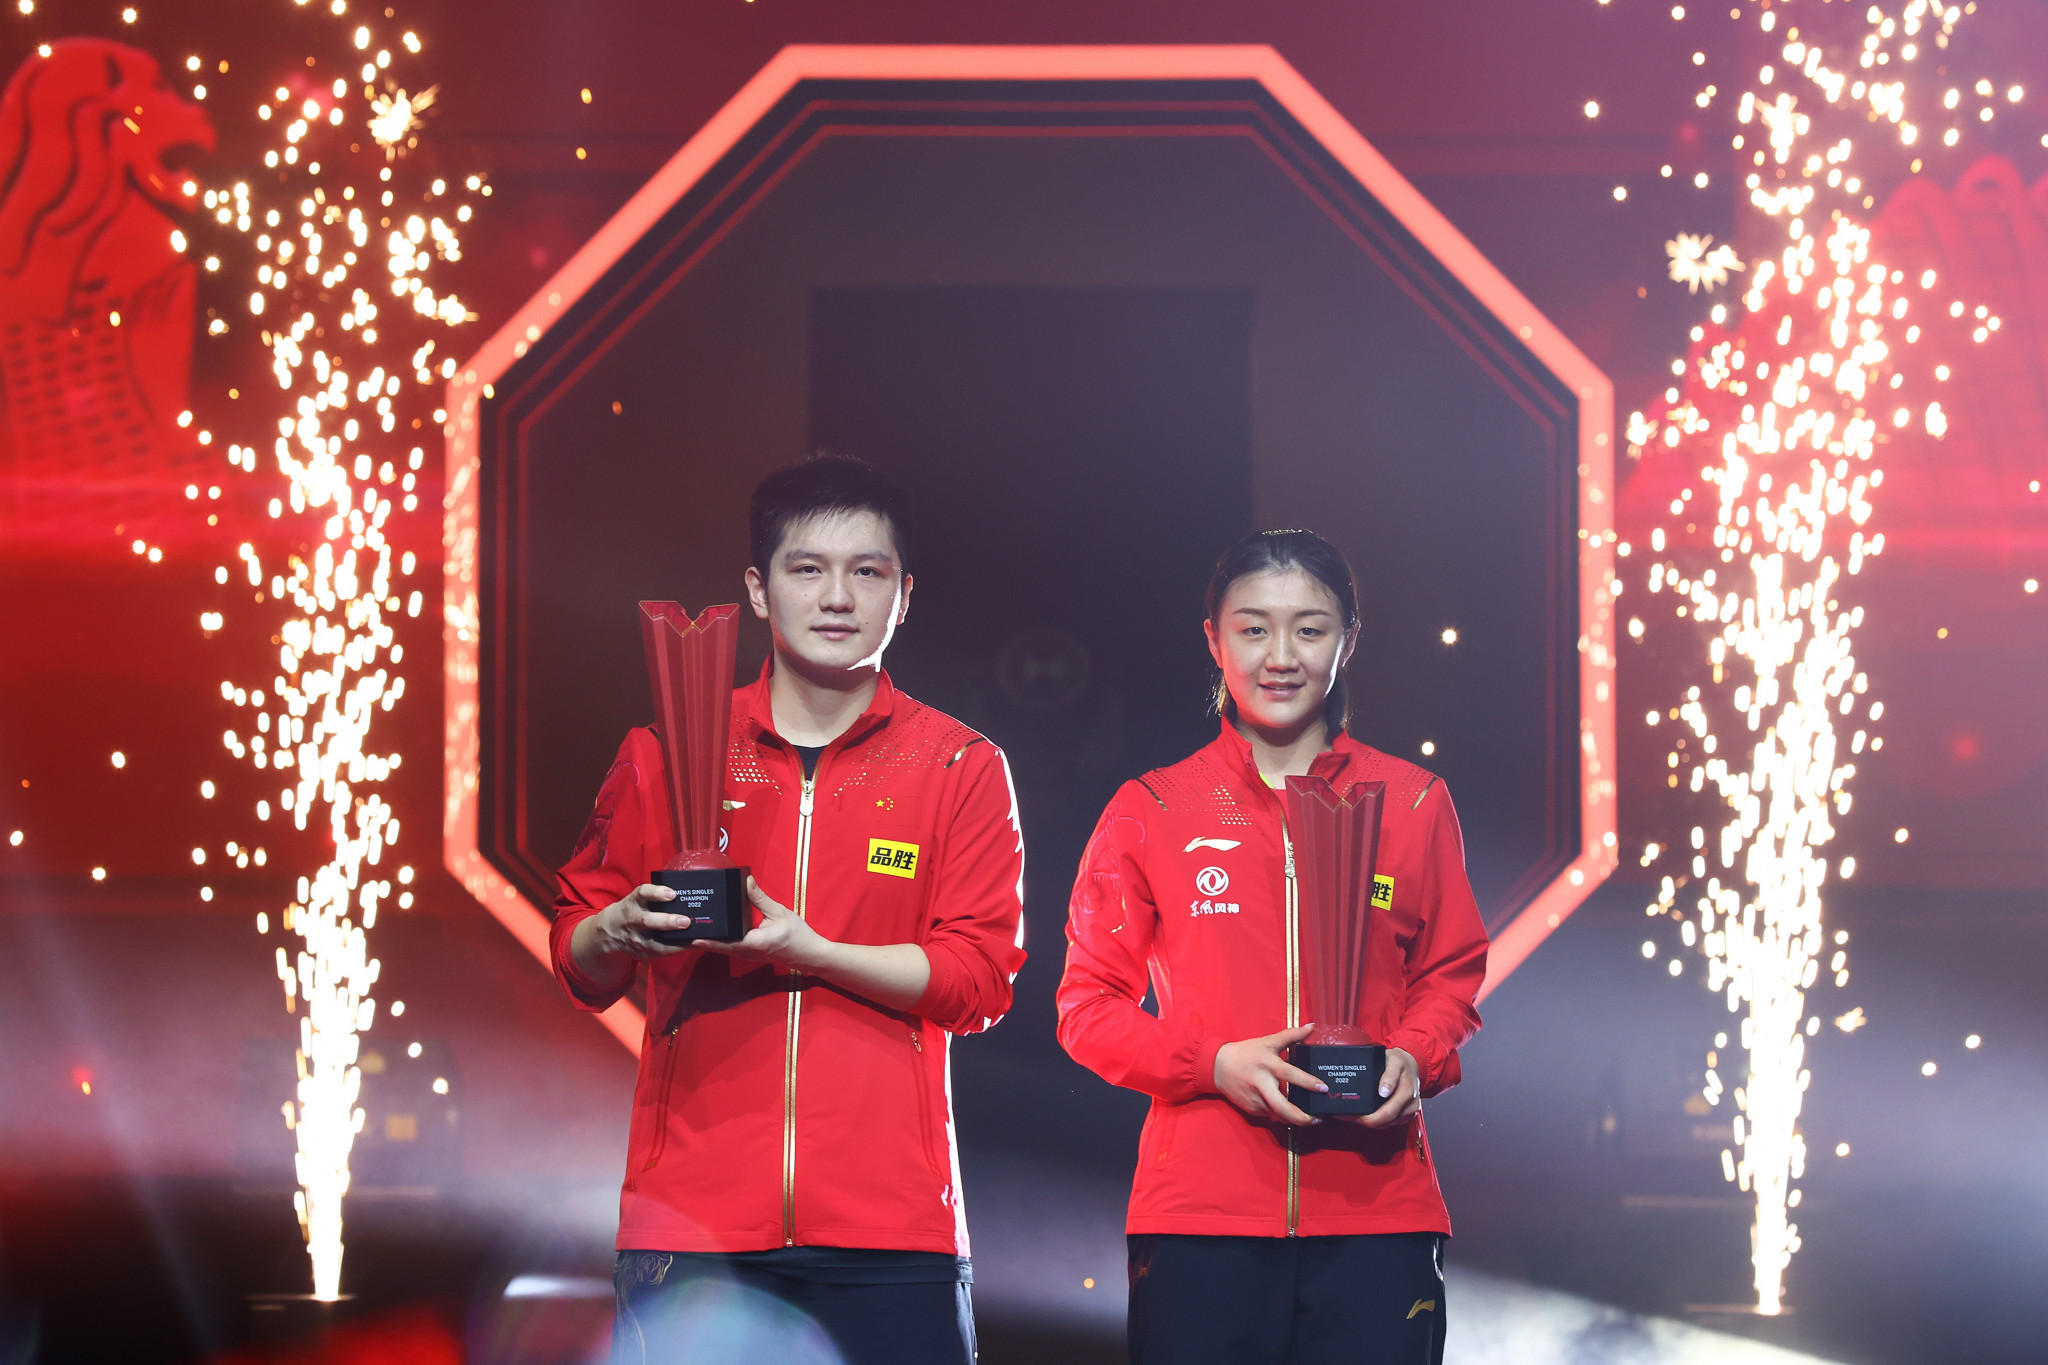 Fan Zhendong and Chen Meng claimed the respective men's and women's singles titles at the WTT Grand Smash in Singapore ©Getty Images